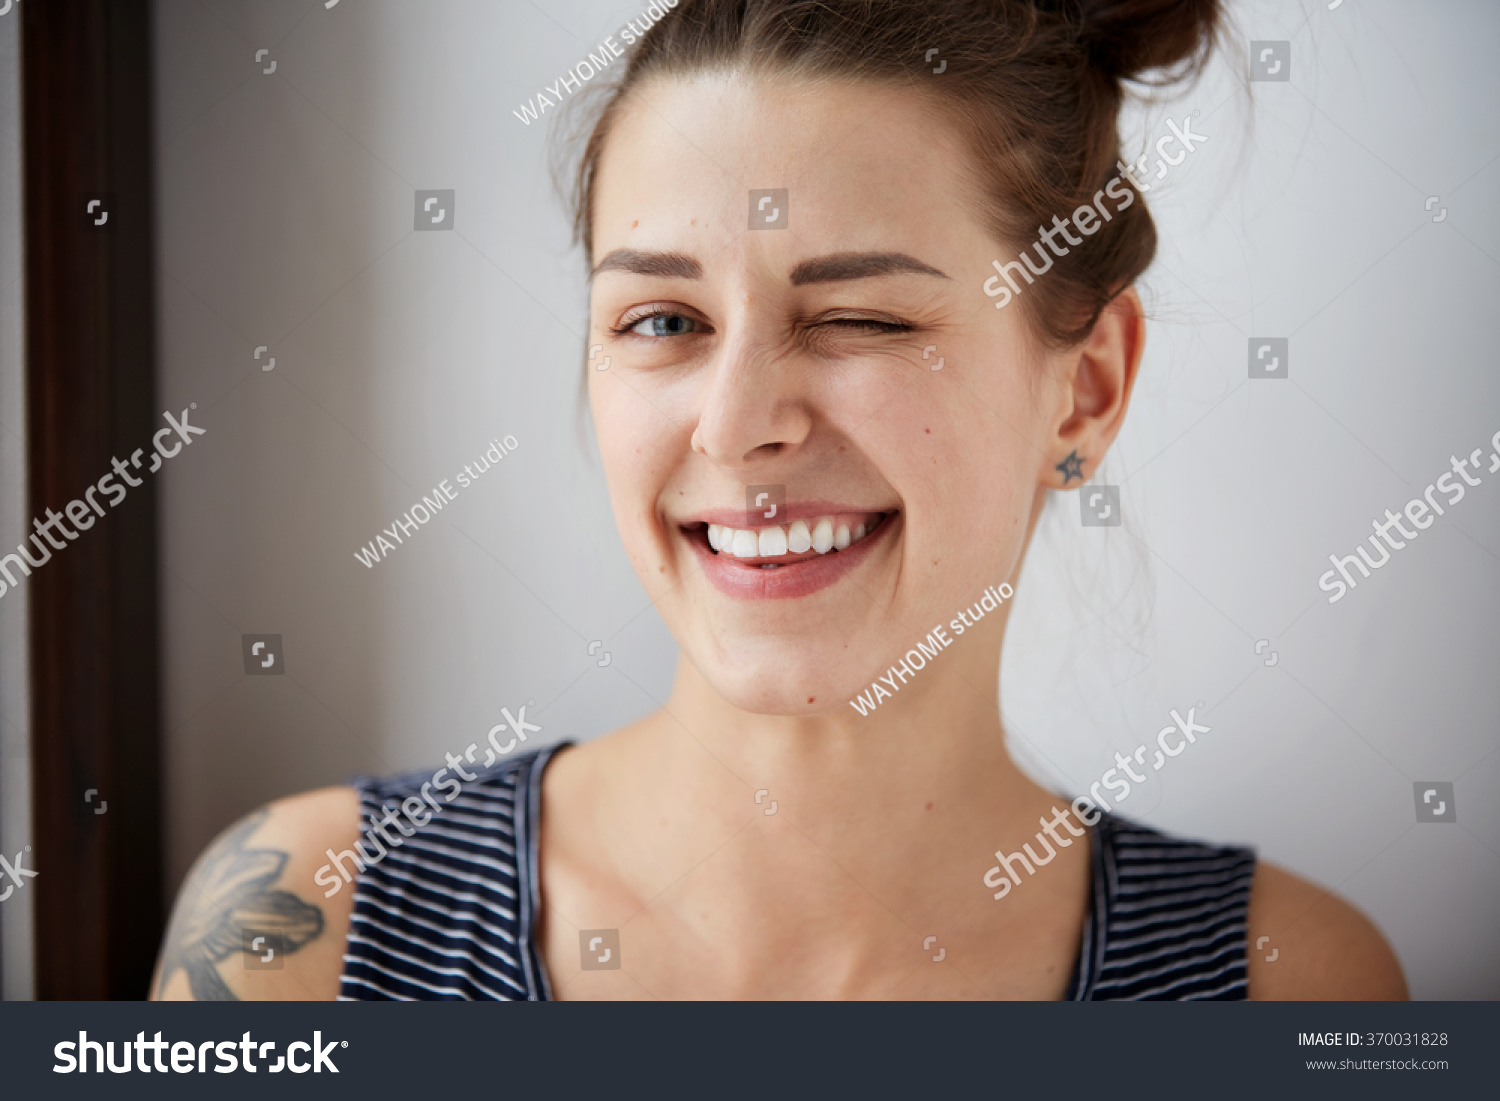 Portrait Of Attractive Cute Woman Winking Over Gray Background. Looking ...